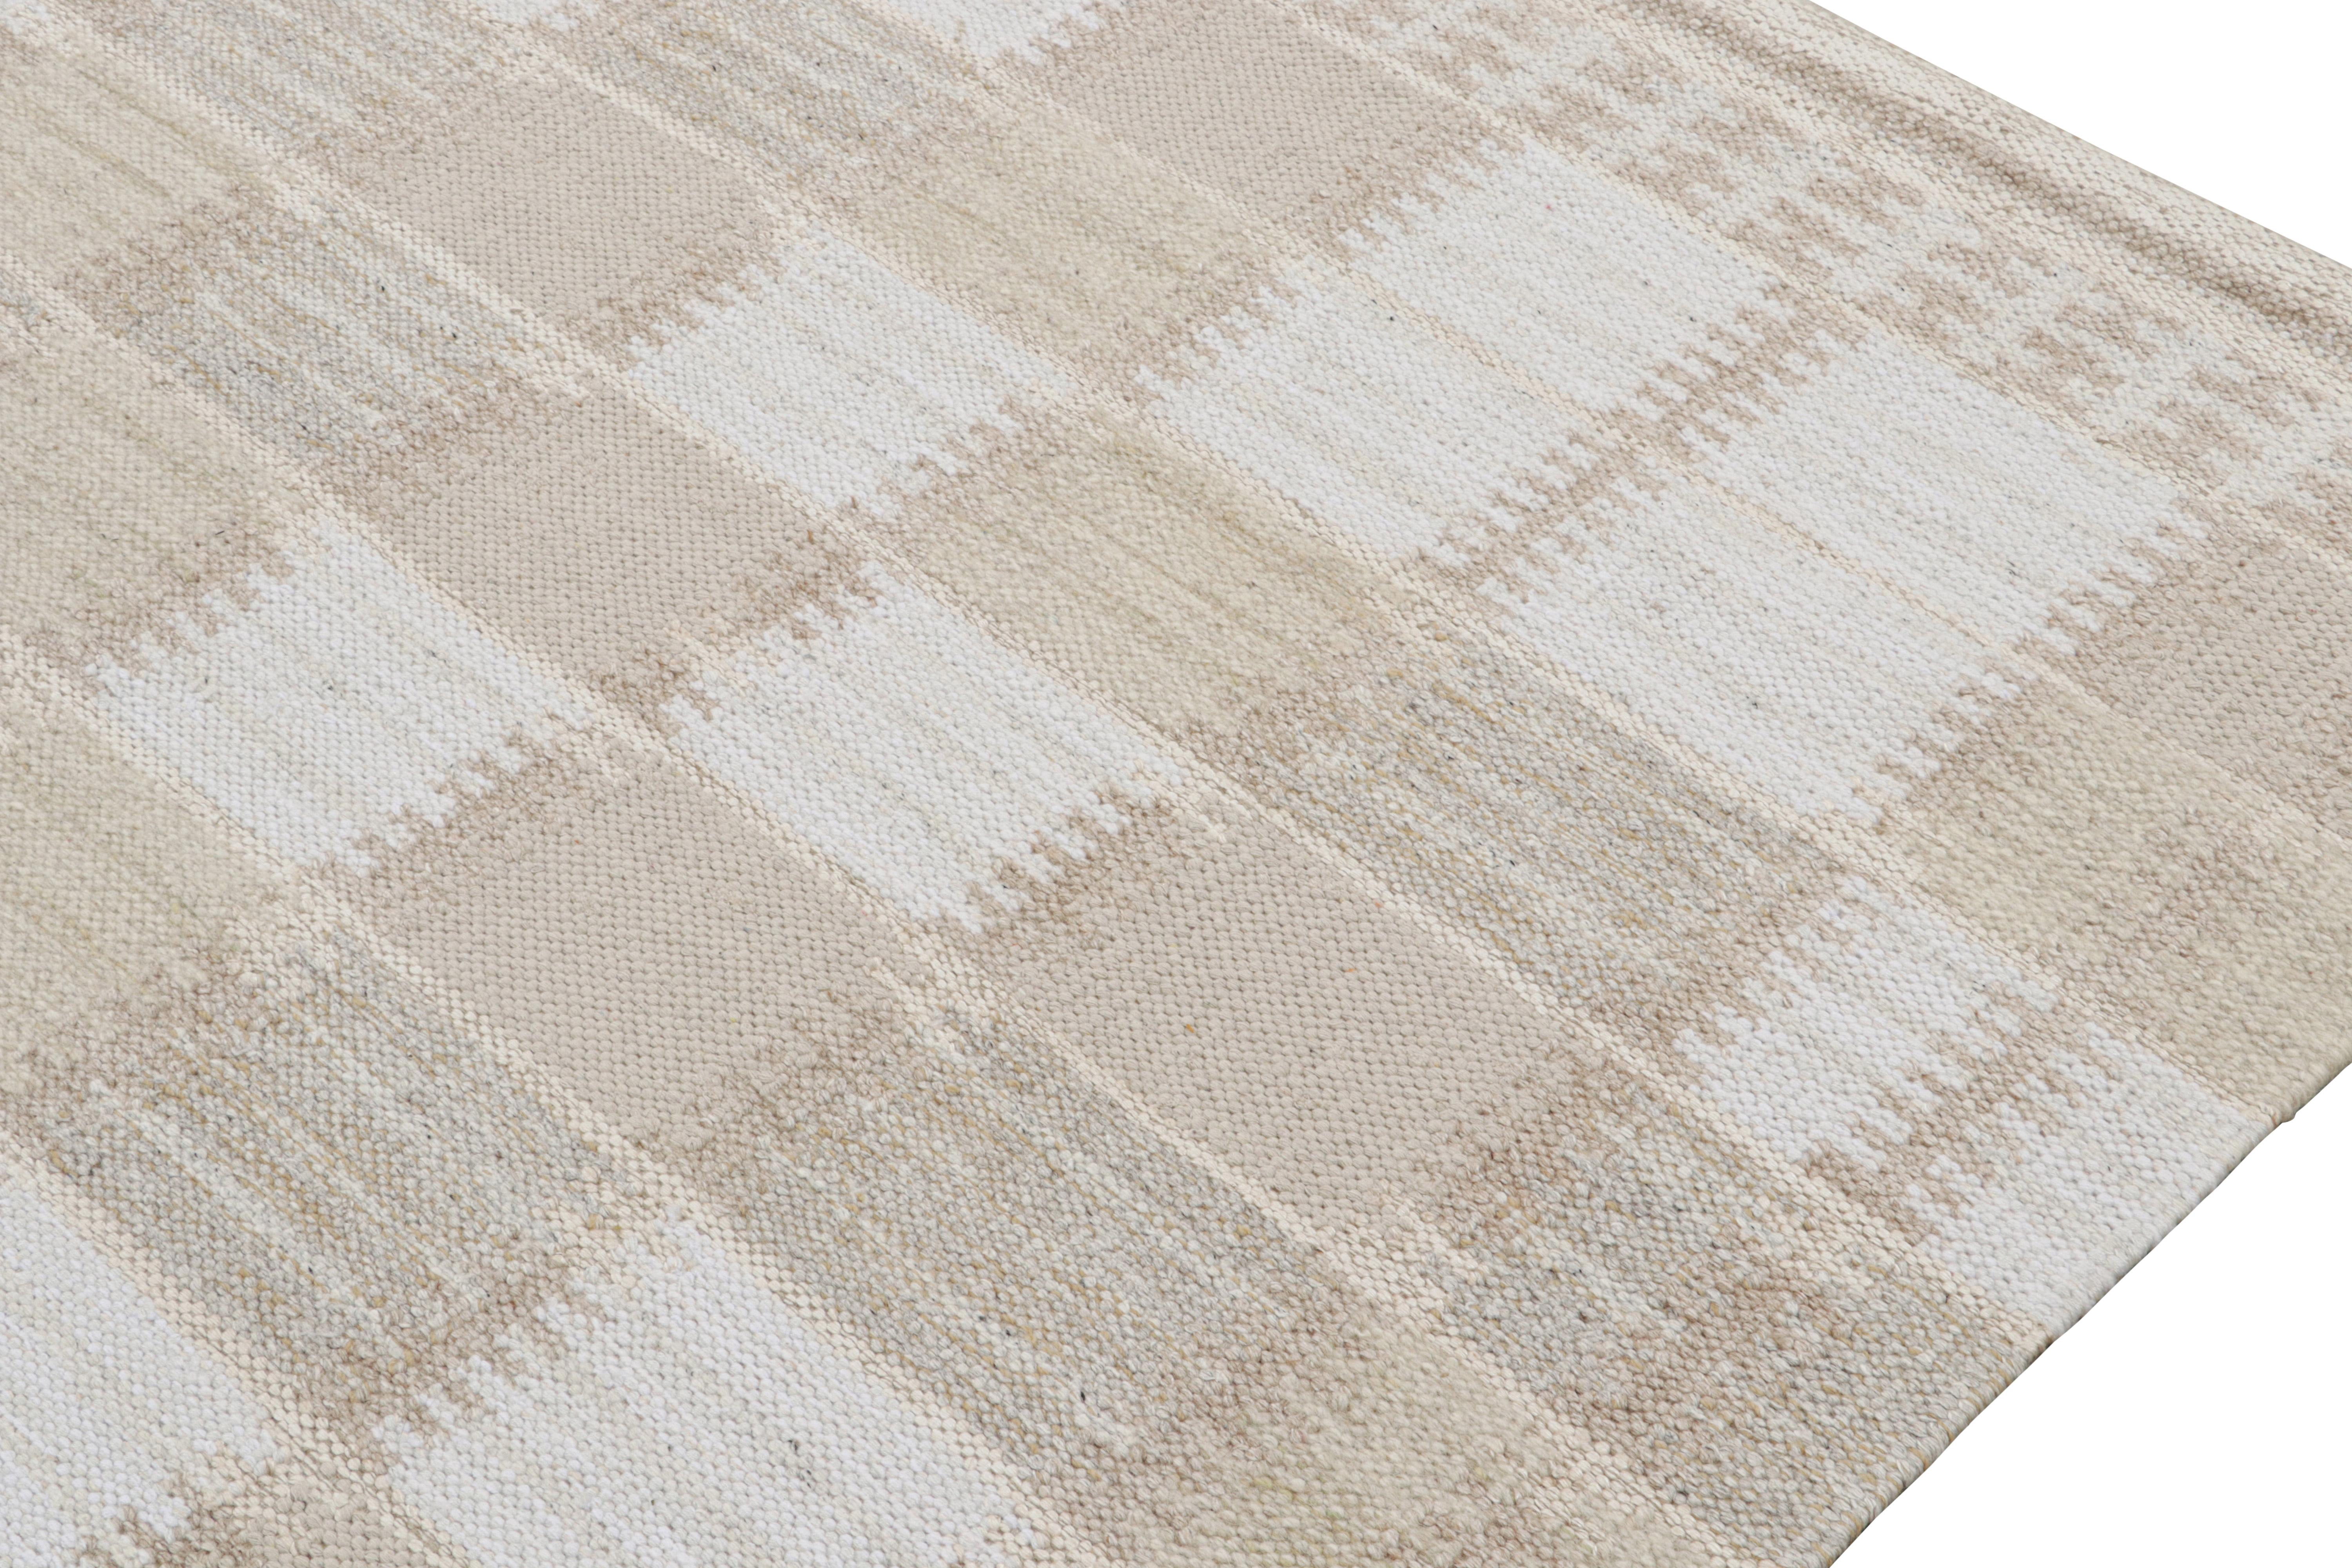 Hand-Woven Rug & Kilim’s Scandinavian Style Kilim Rug in Taupe & Blue Geometric Patterns For Sale